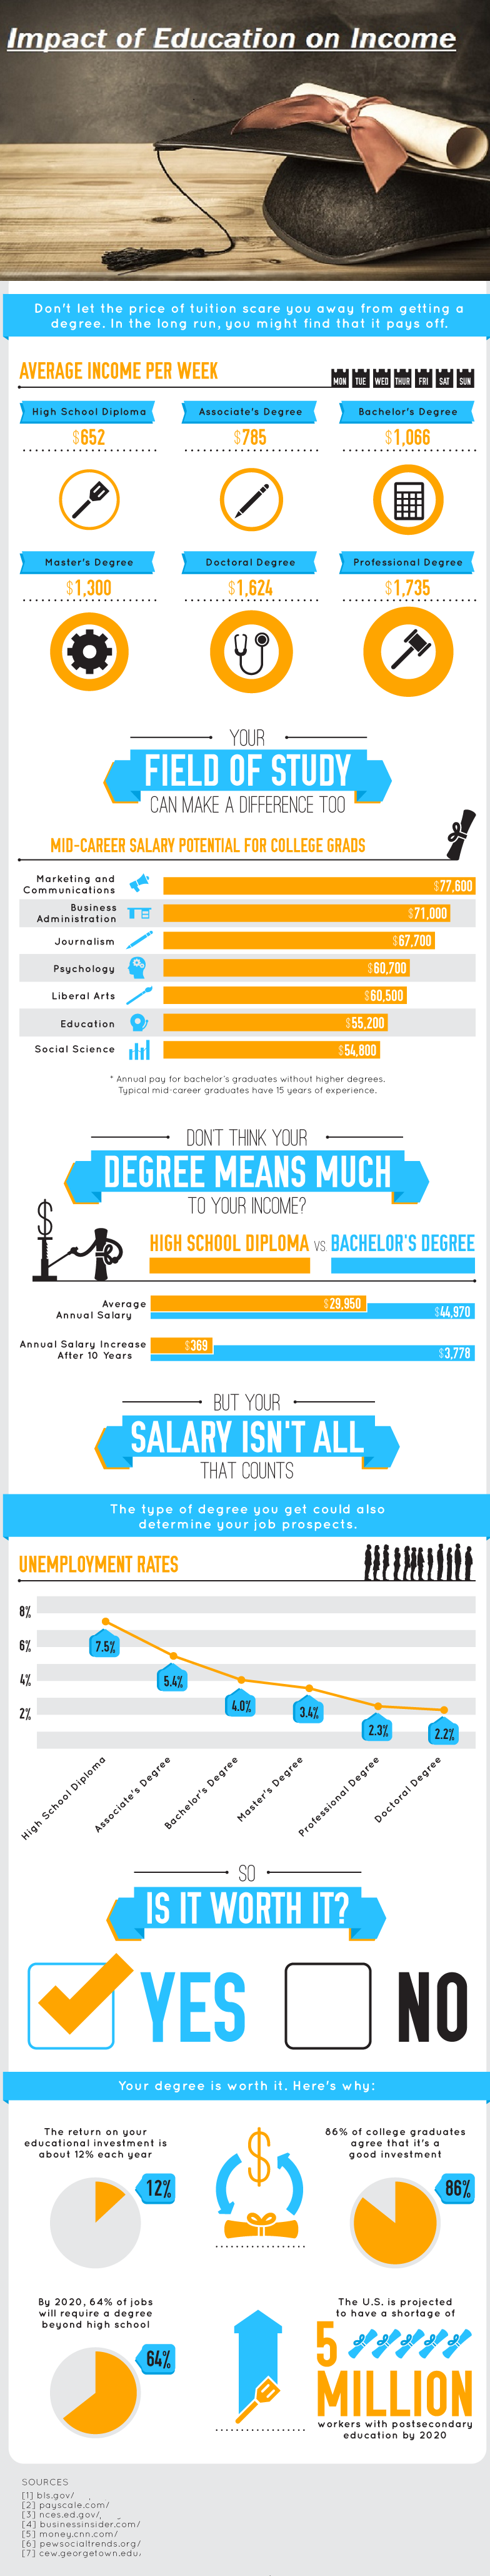 Infographic: The impact of education on income